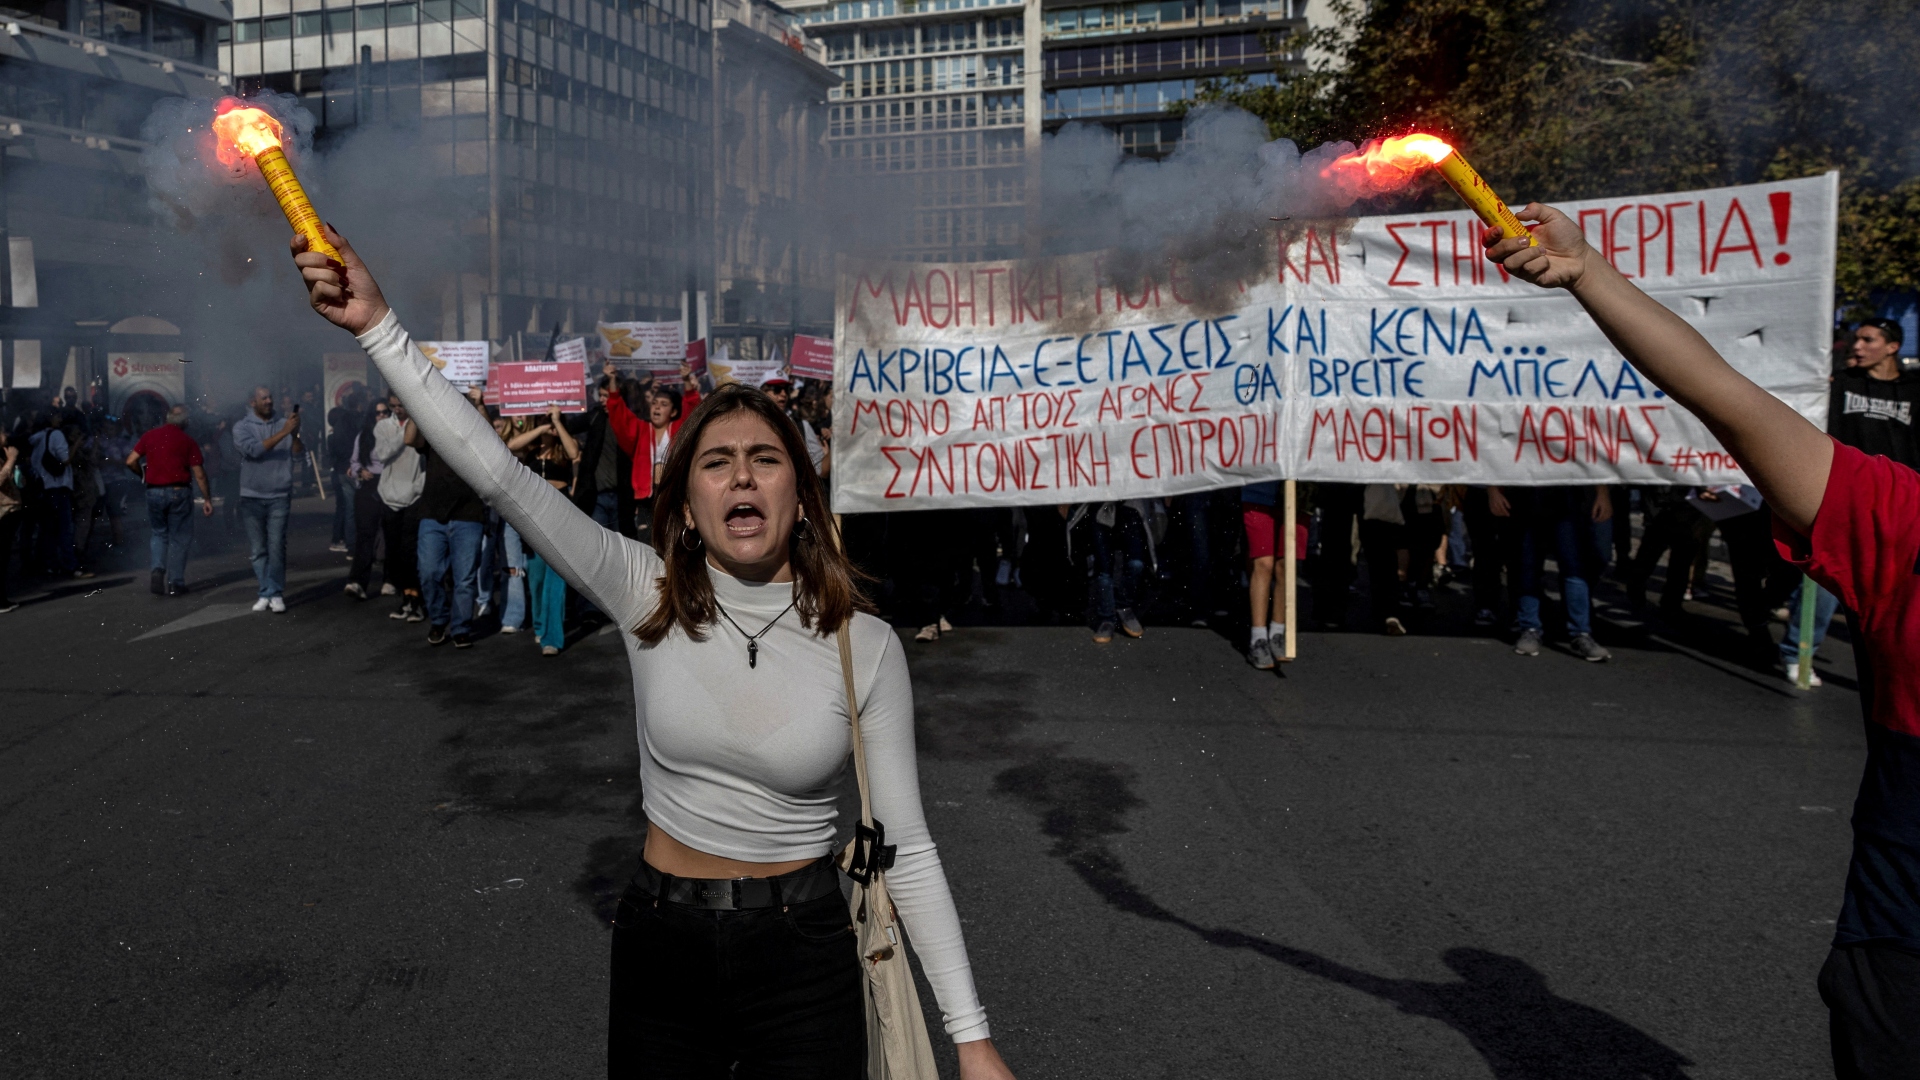 Thousands took to the streets during the 24 hour nationwide strike in Greece./Alkis Konstantinidis/Reuters